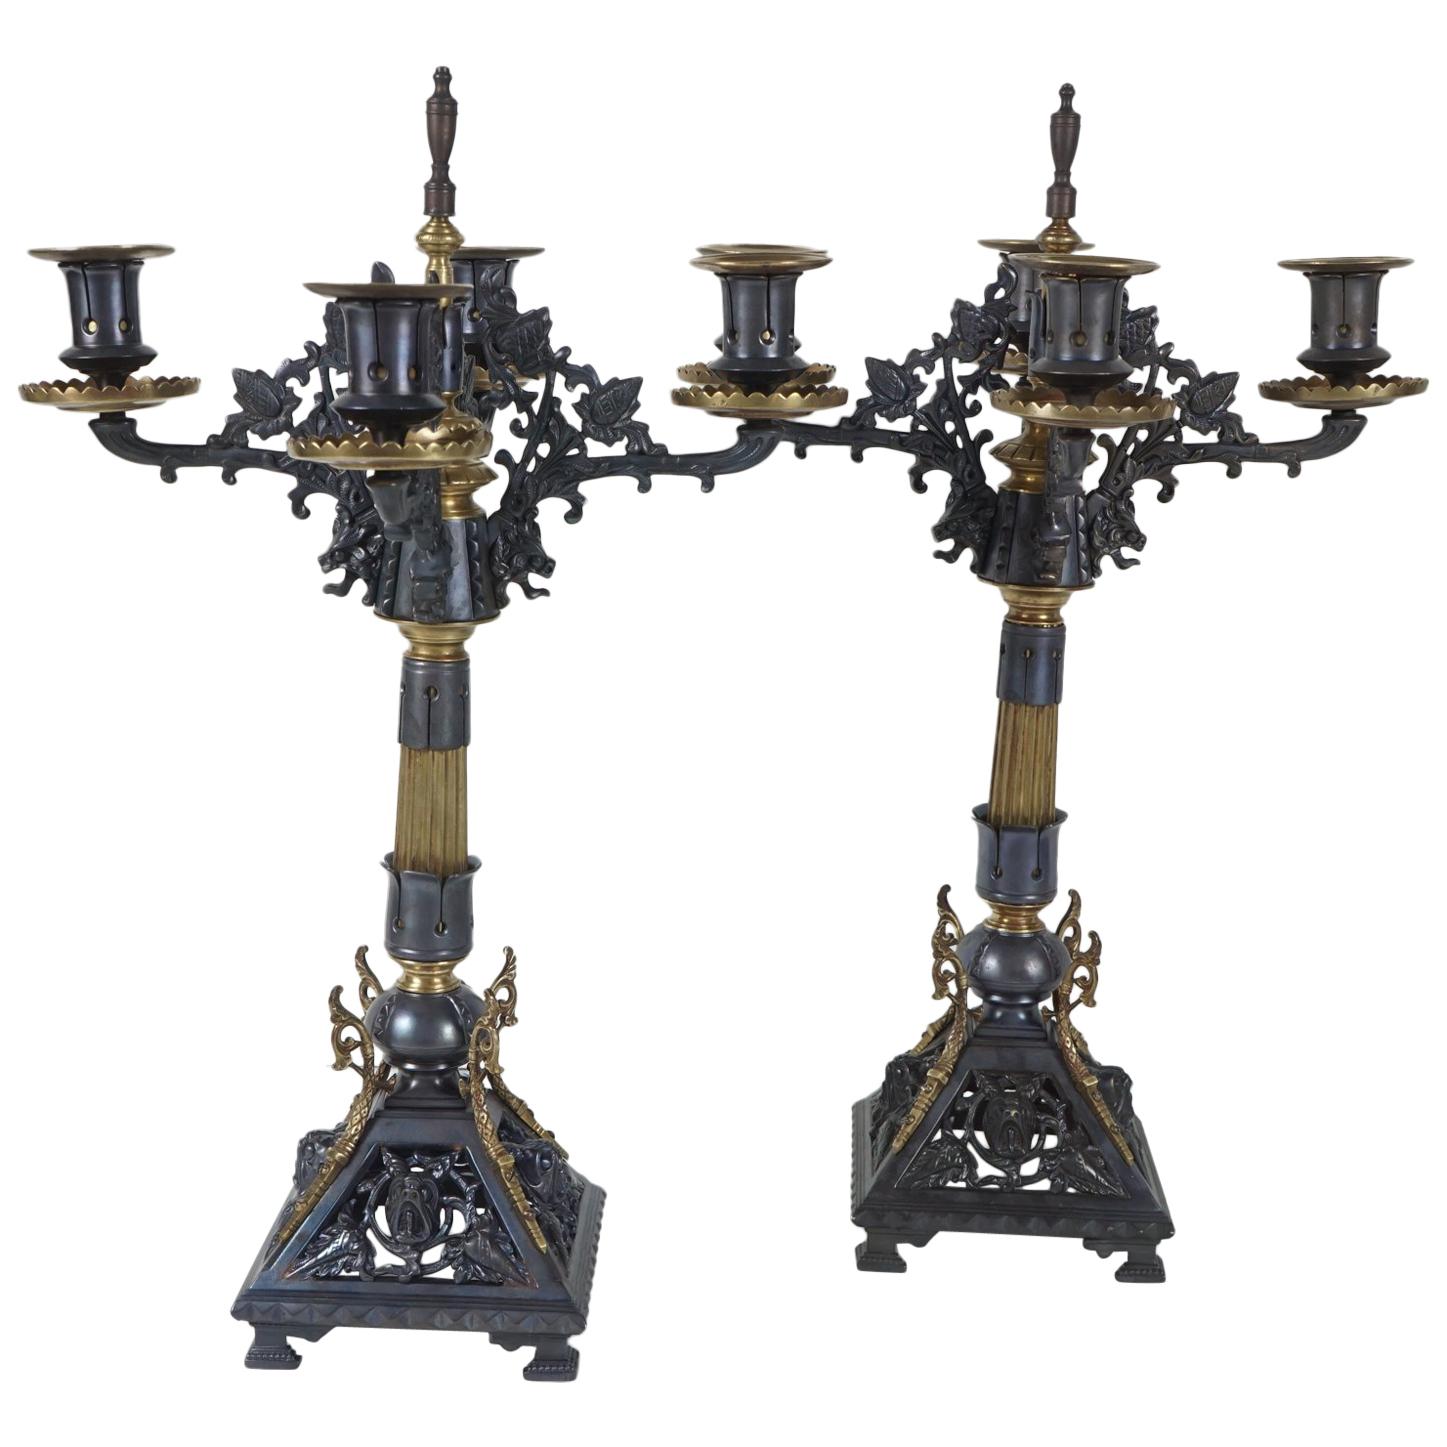 Pair of Patinated and Polished Bronze Renaissance Revival Candelabra For Sale